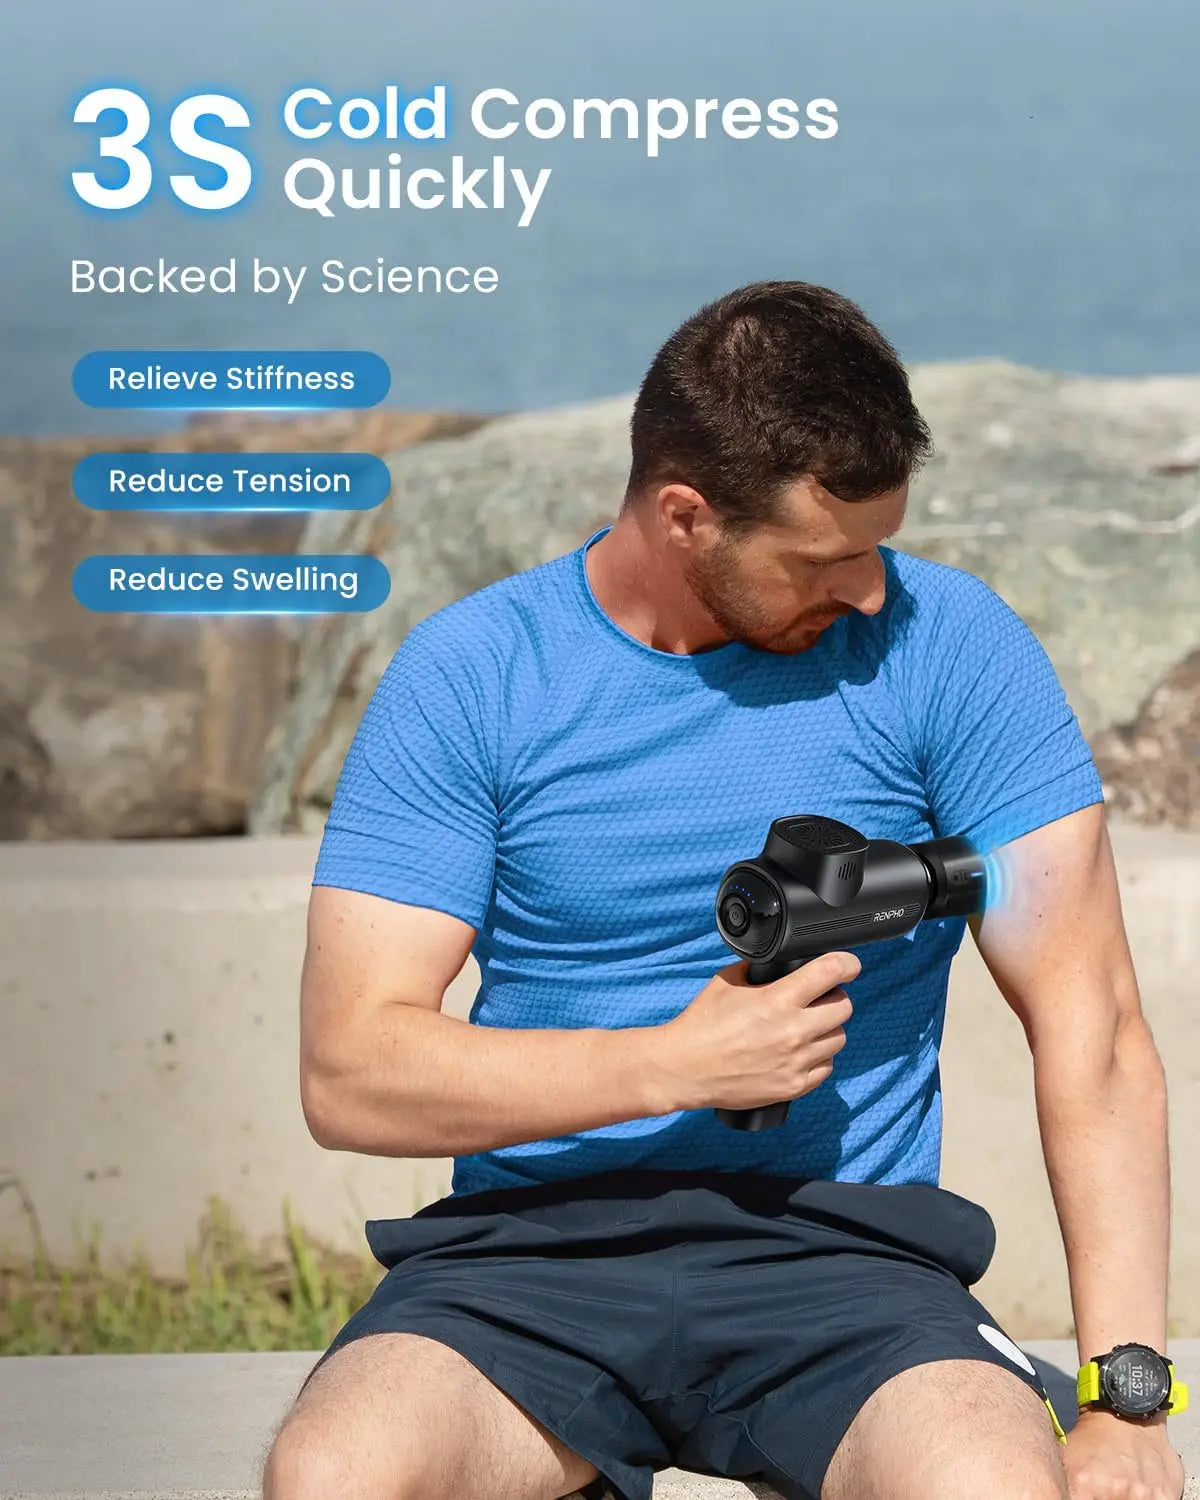 A man in athletic wear uses a RENPHO Active Thermacool Massage Gun by Renpho EU for deep tissue massage on his left arm while seated outdoors. He is wearing a blue shirt and black shorts. The image includes text that reads “3S Cold Compress Quickly. Backed by Science," with bullet points: "Relieve Stiffness," "Reduce Tension," and "Reduce Swelling.